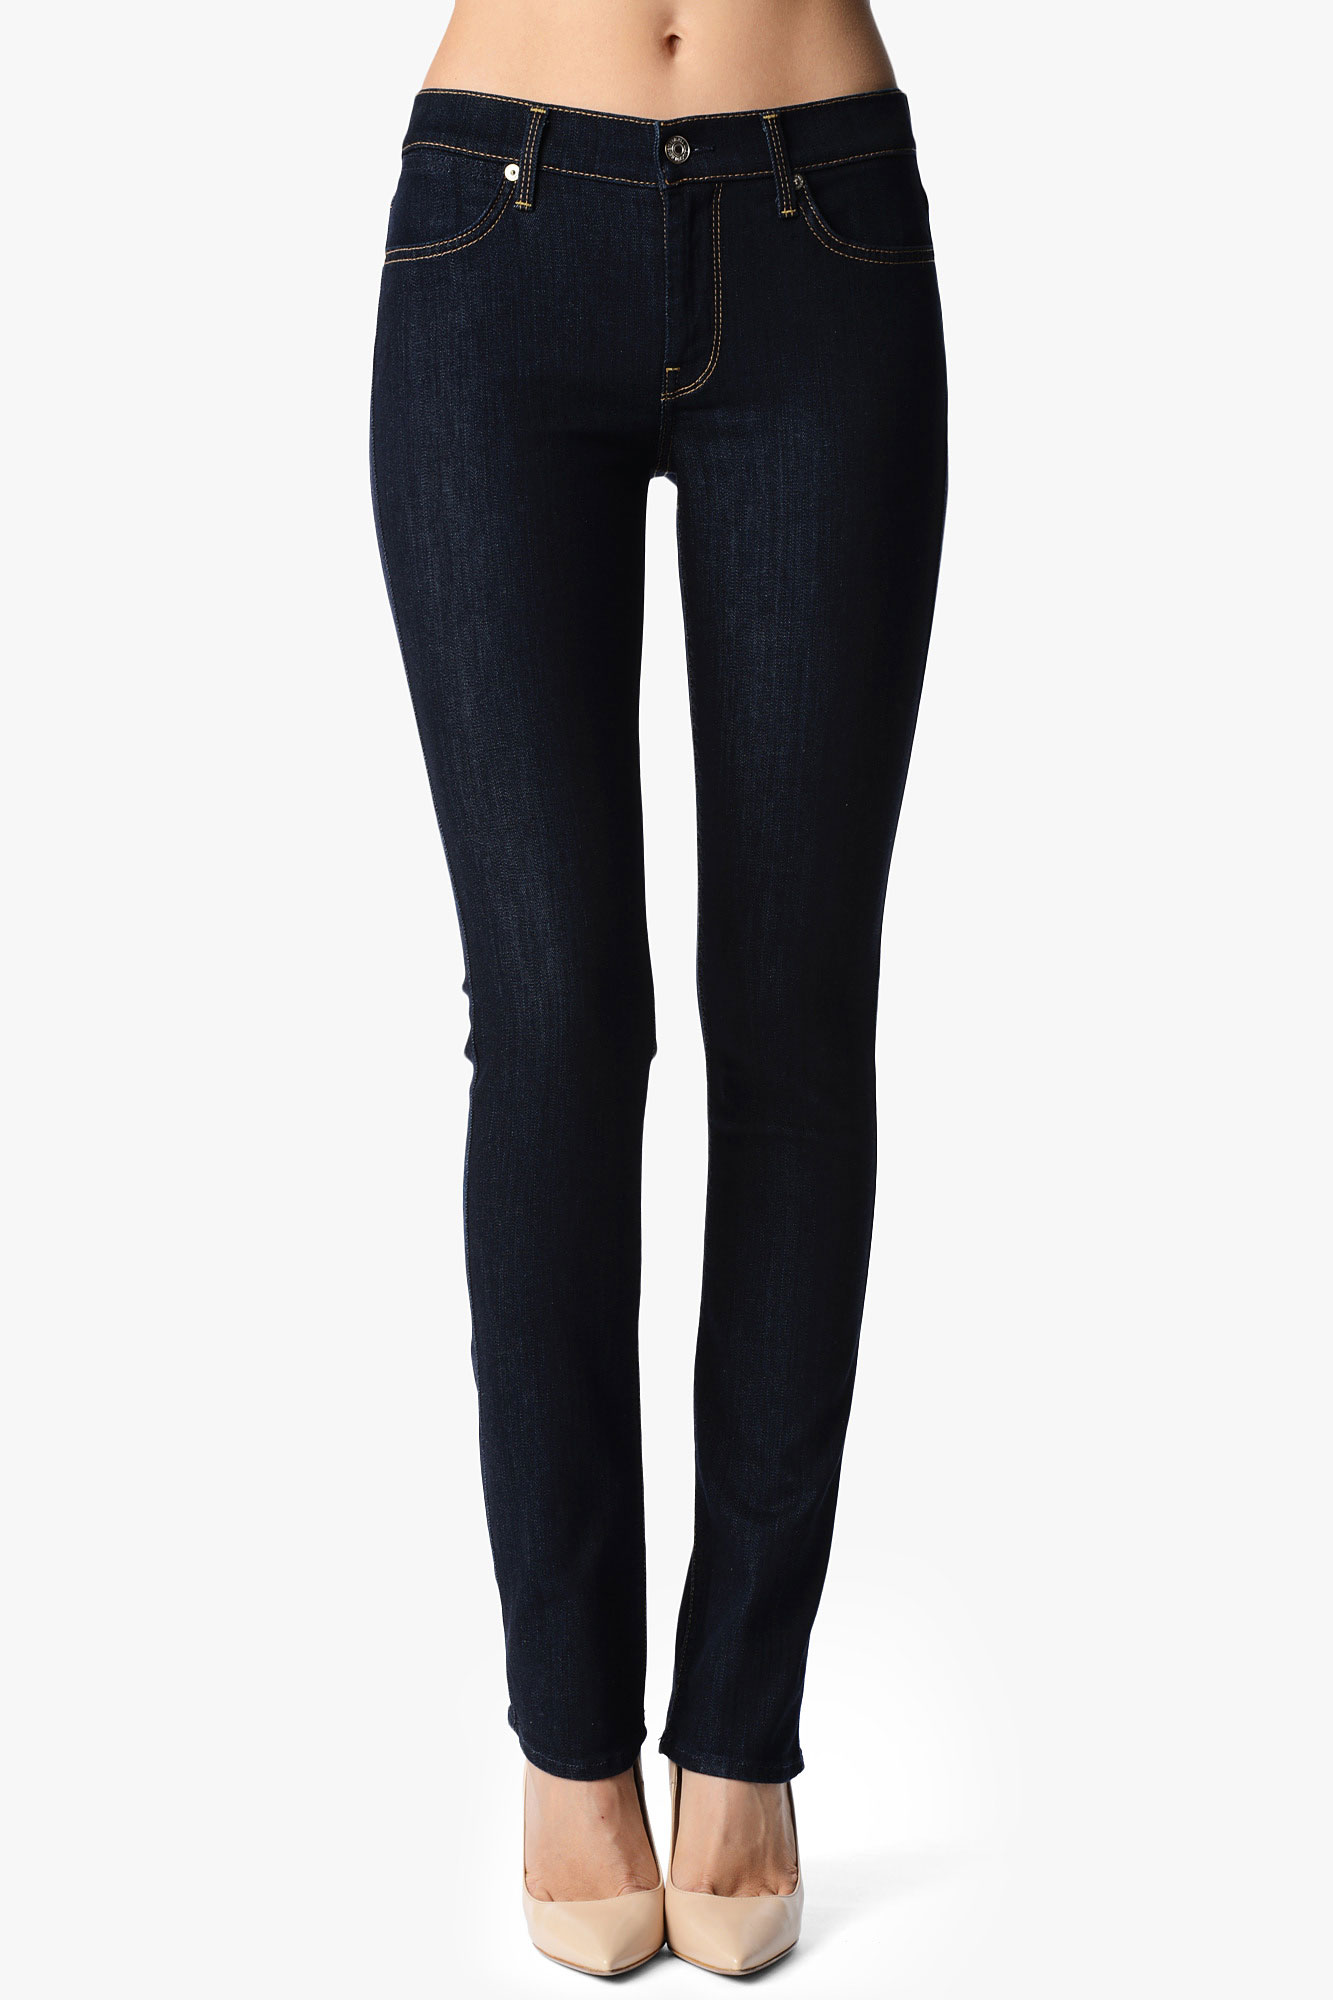 Lyst - 7 For All Mankind Roxanne Slim Fit Mid Rise Jean in Blue